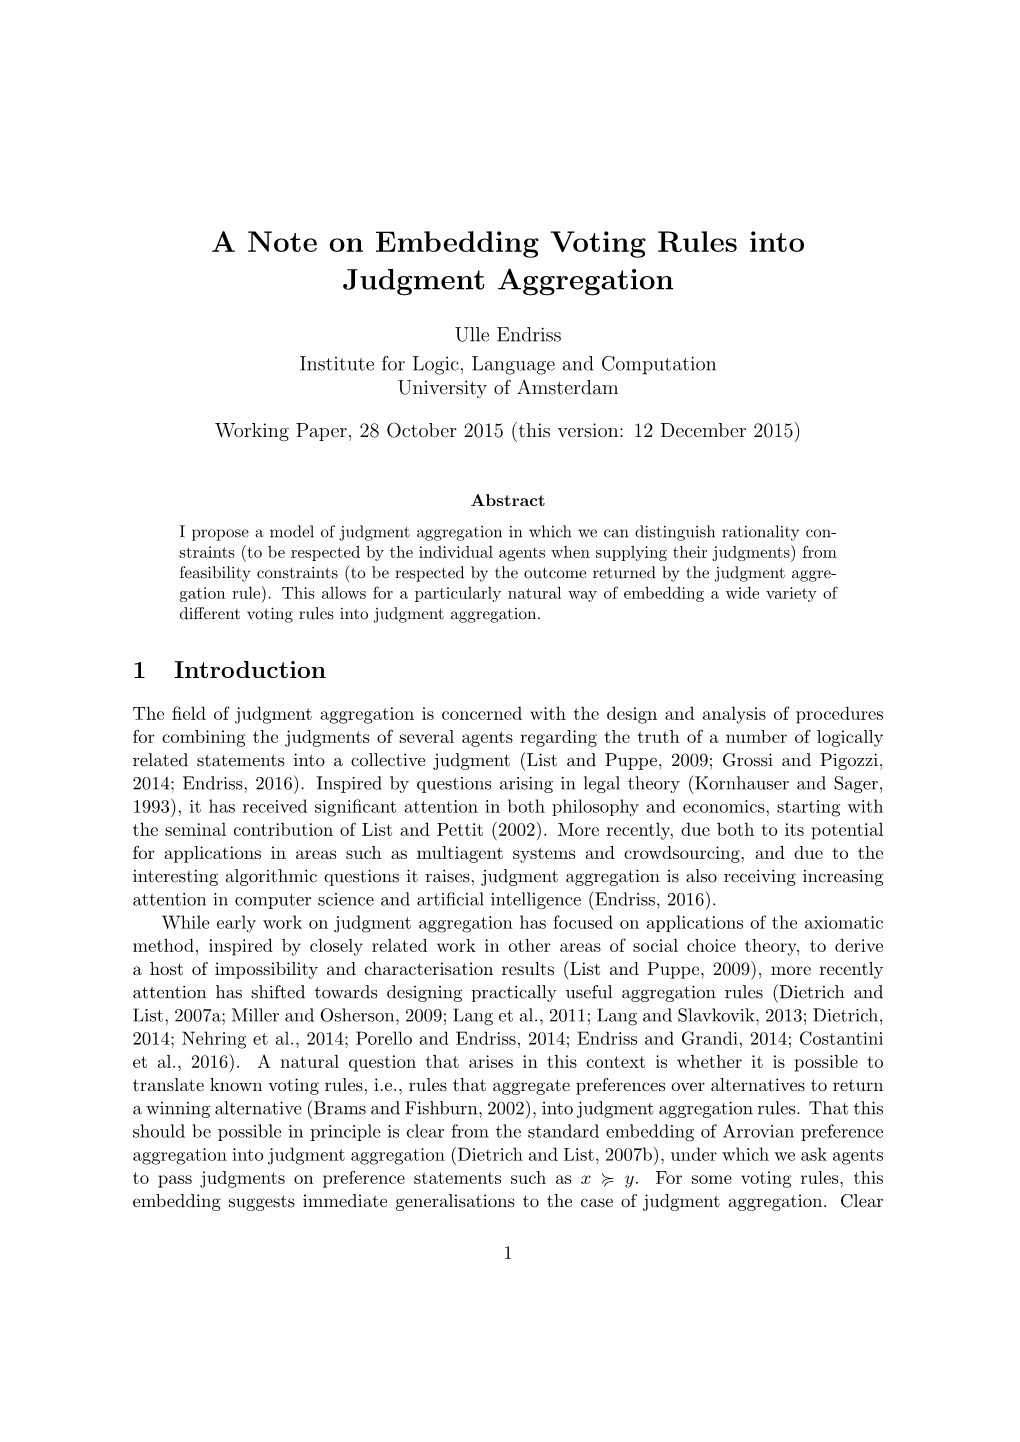 A Note on Embedding Voting Rules Into Judgment Aggregation